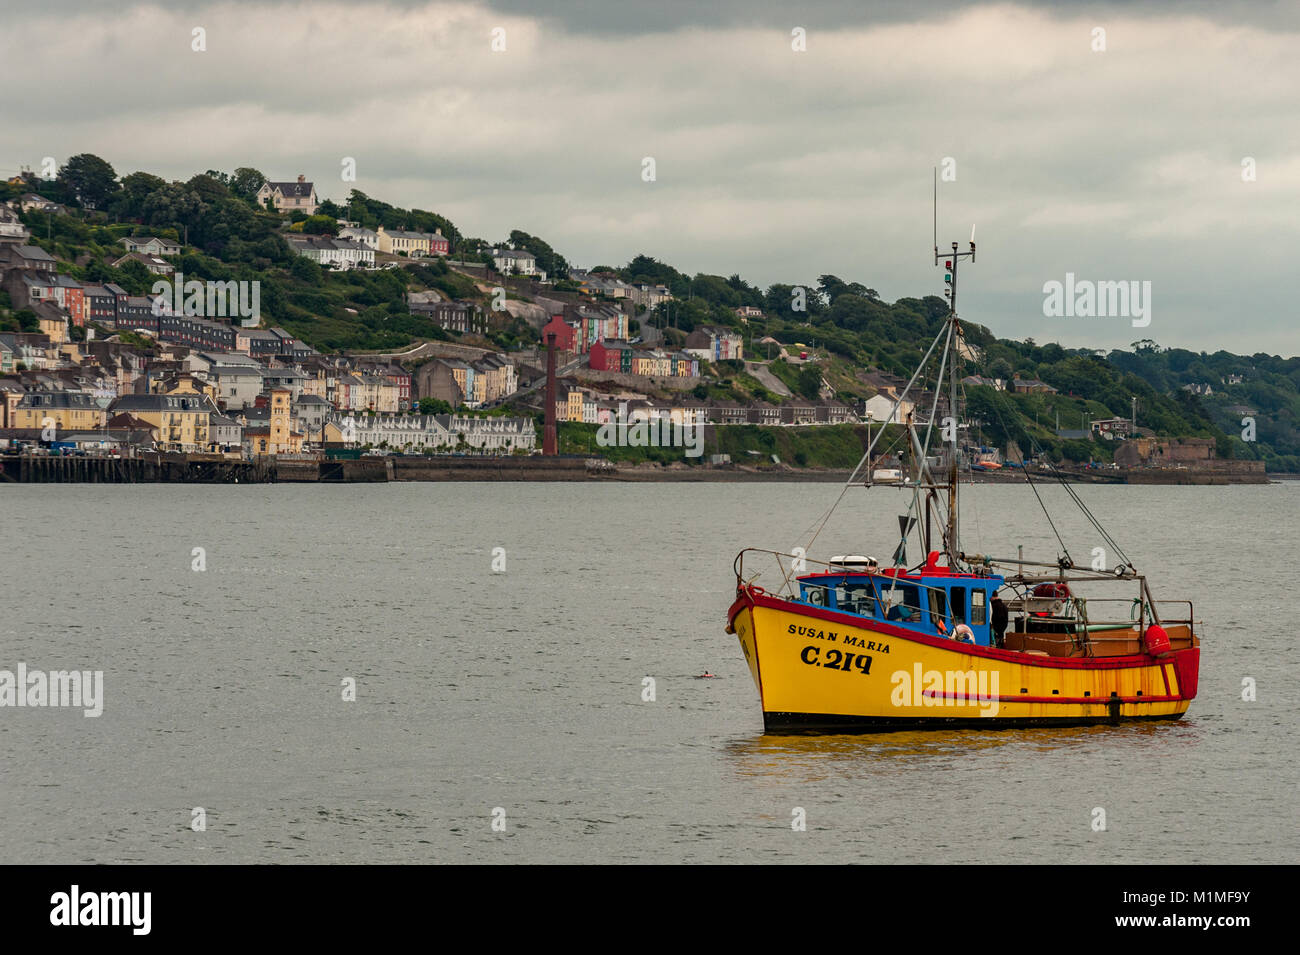 Small trawler fishes off Cobh, County Cork, Ireland with copy space. Stock Photo